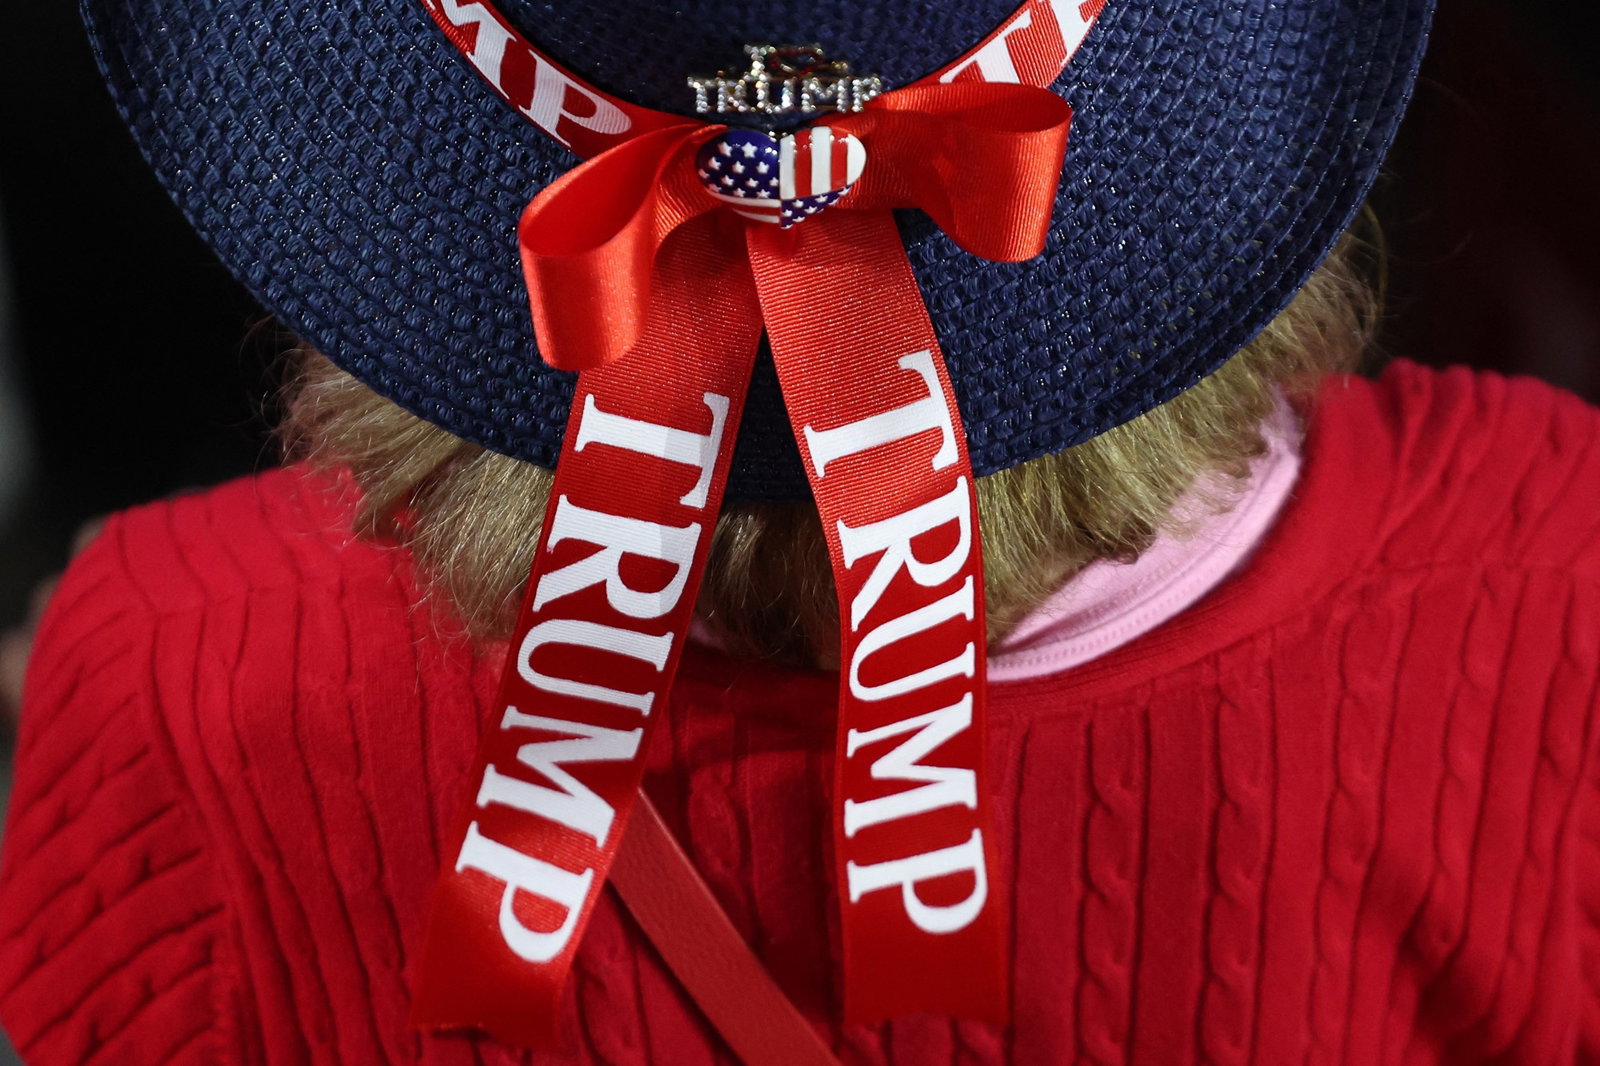 A woman wears a hat with a red ribbon saying Trump